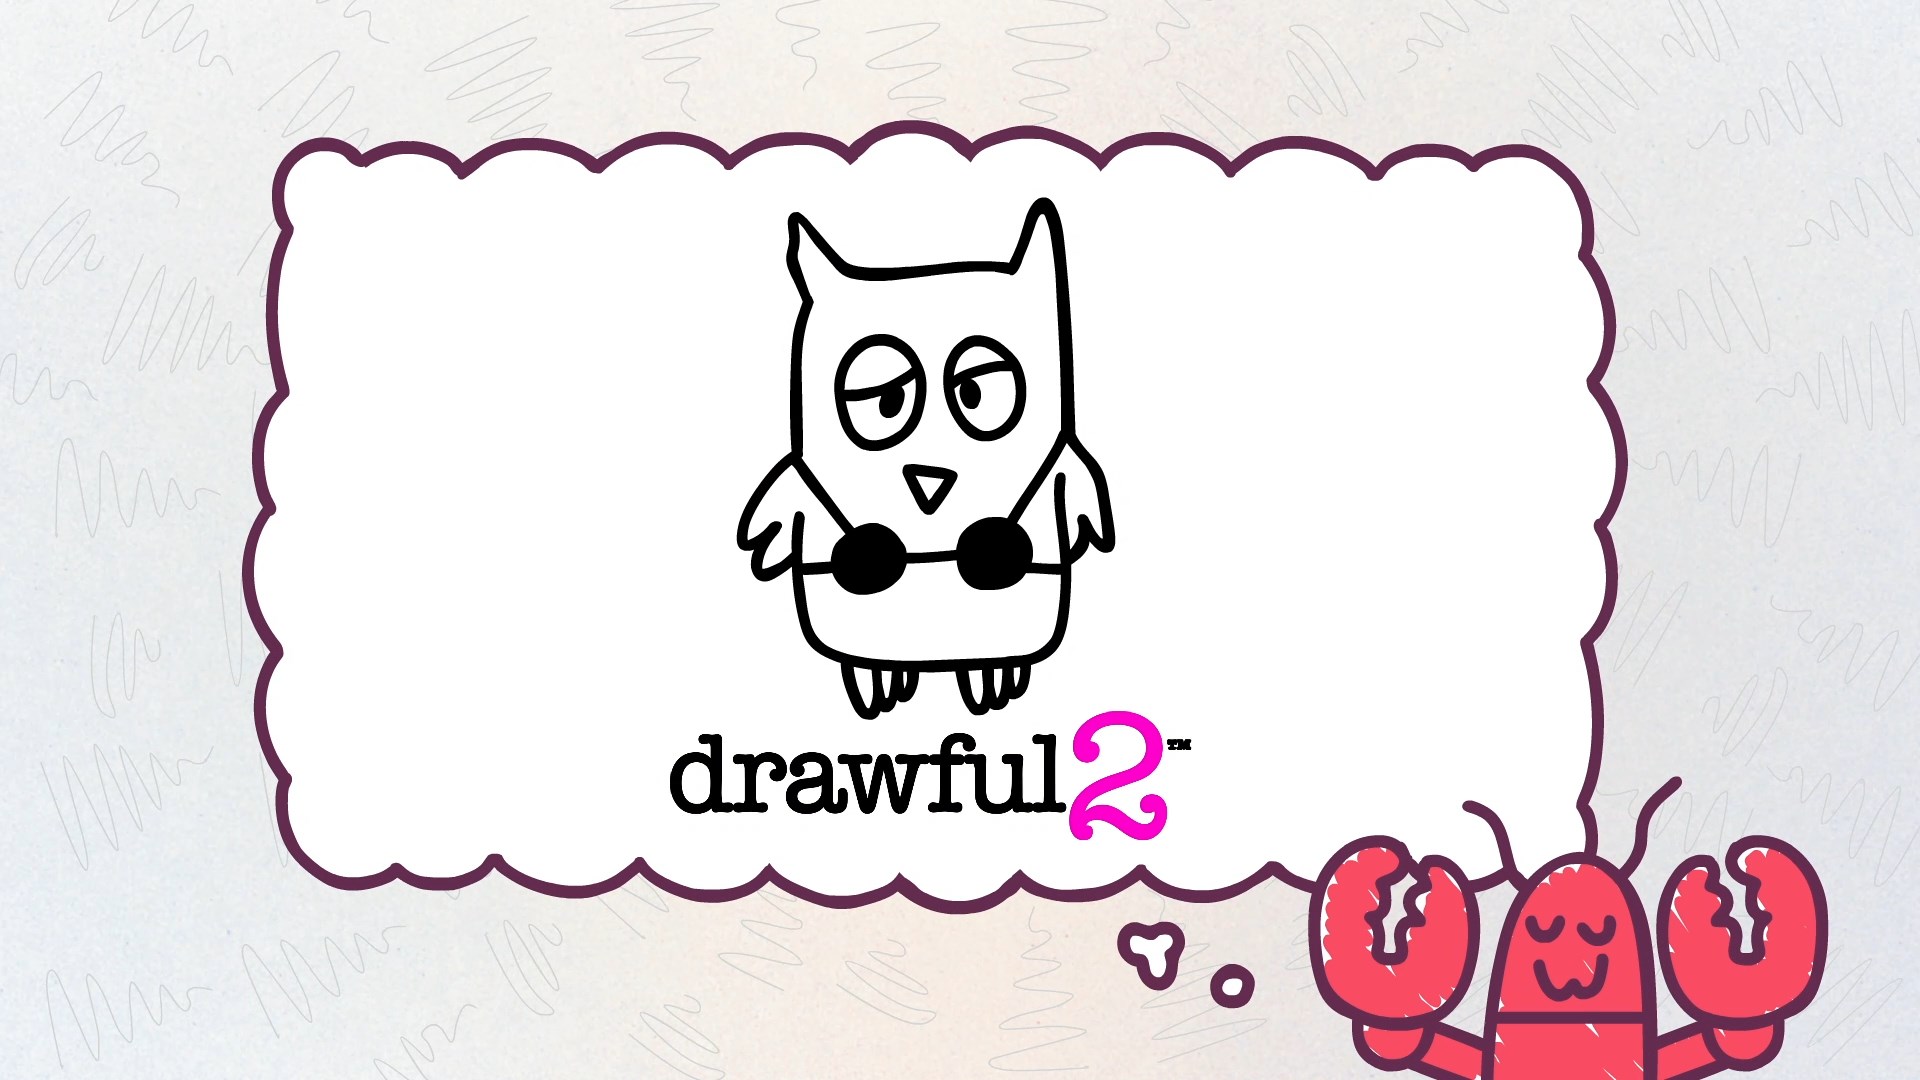 Buy Drawful 2 (Xbox) cheap from 71 RUB.